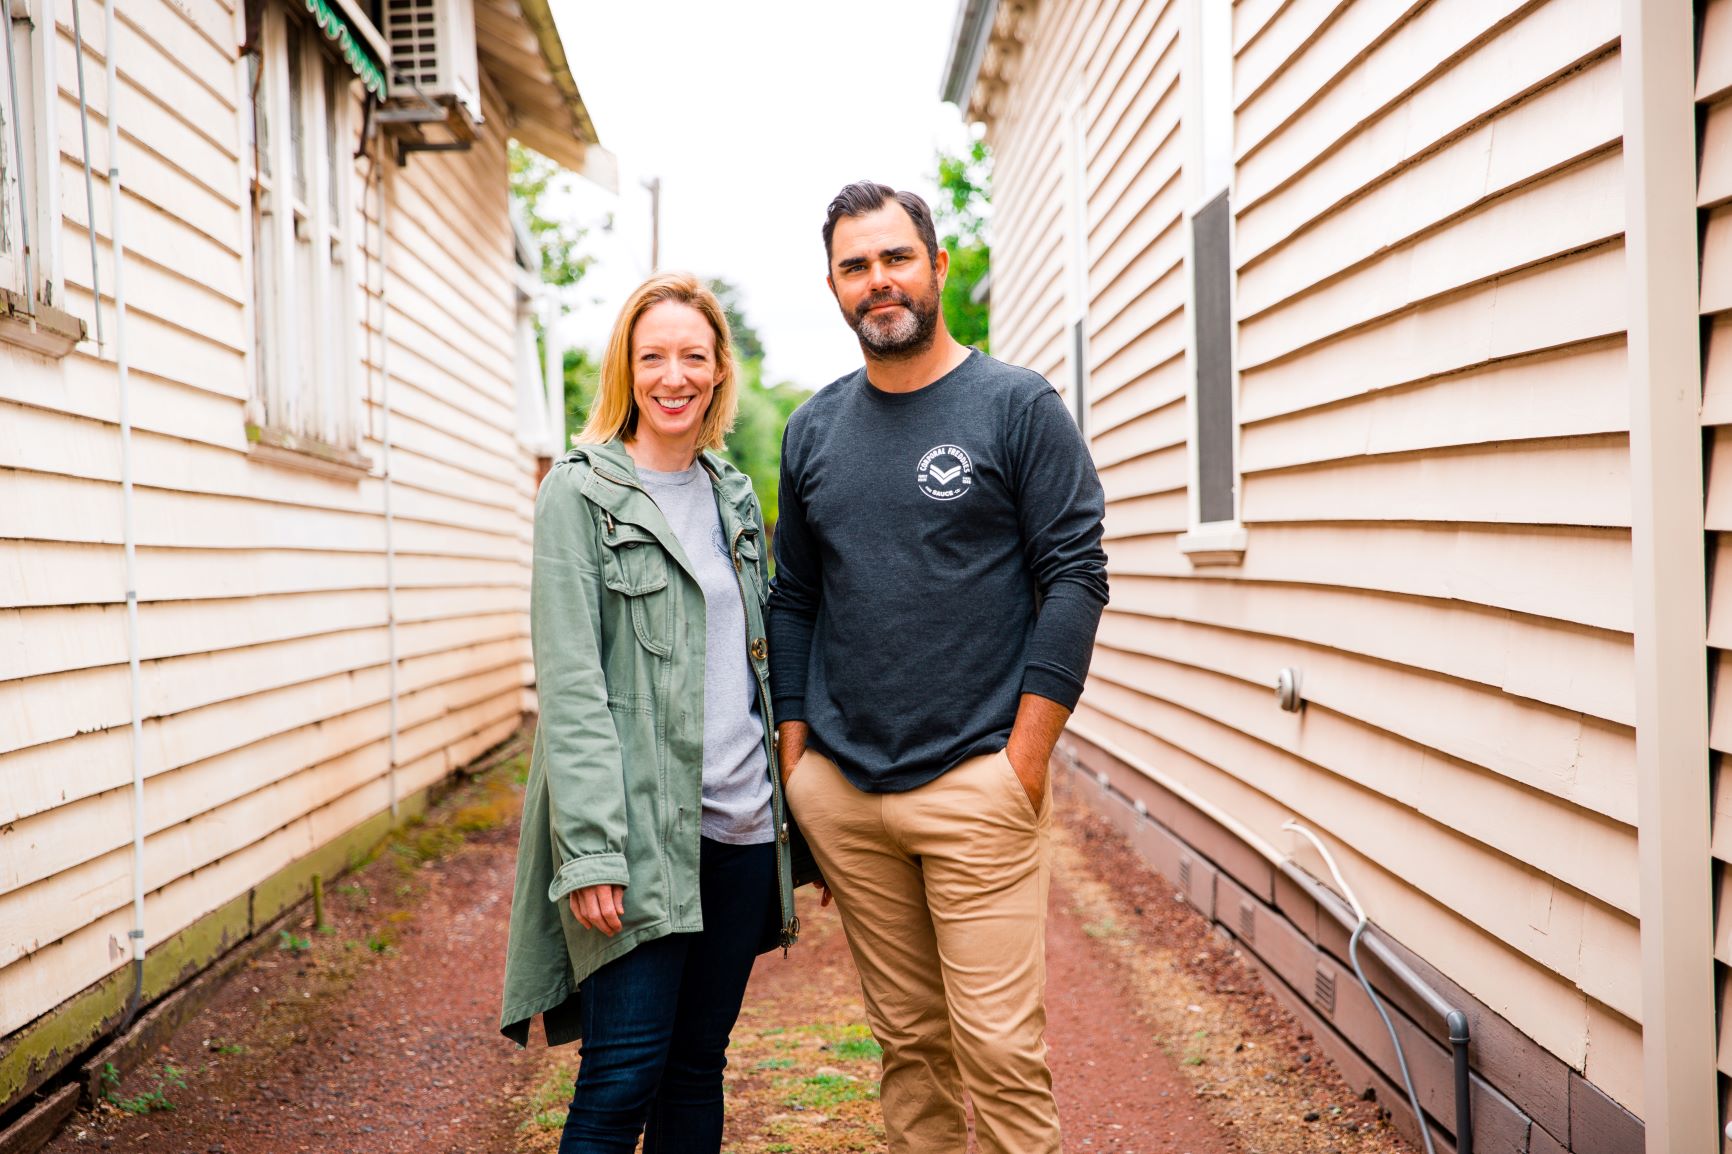 Keri & Mike, founders of Corporal Freddies standing outside a weatherboard home and smiling